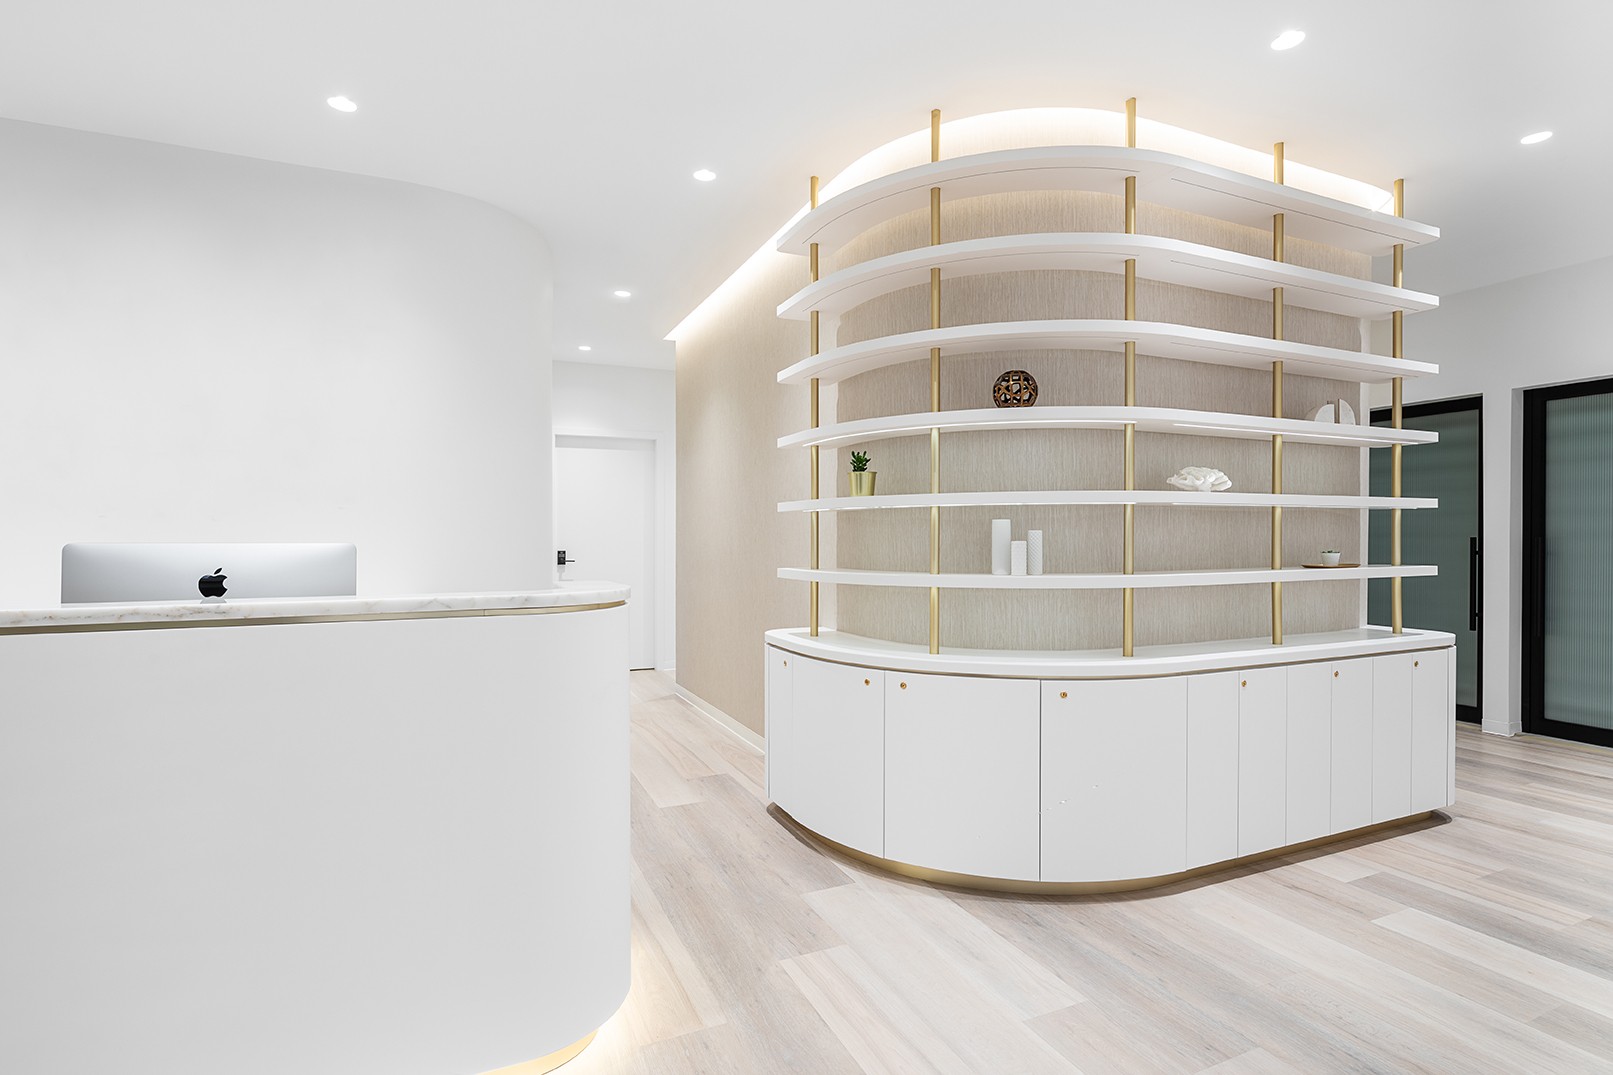 , , Medical Aesthetic Clinic in Vancouver  B.C., by Cutler